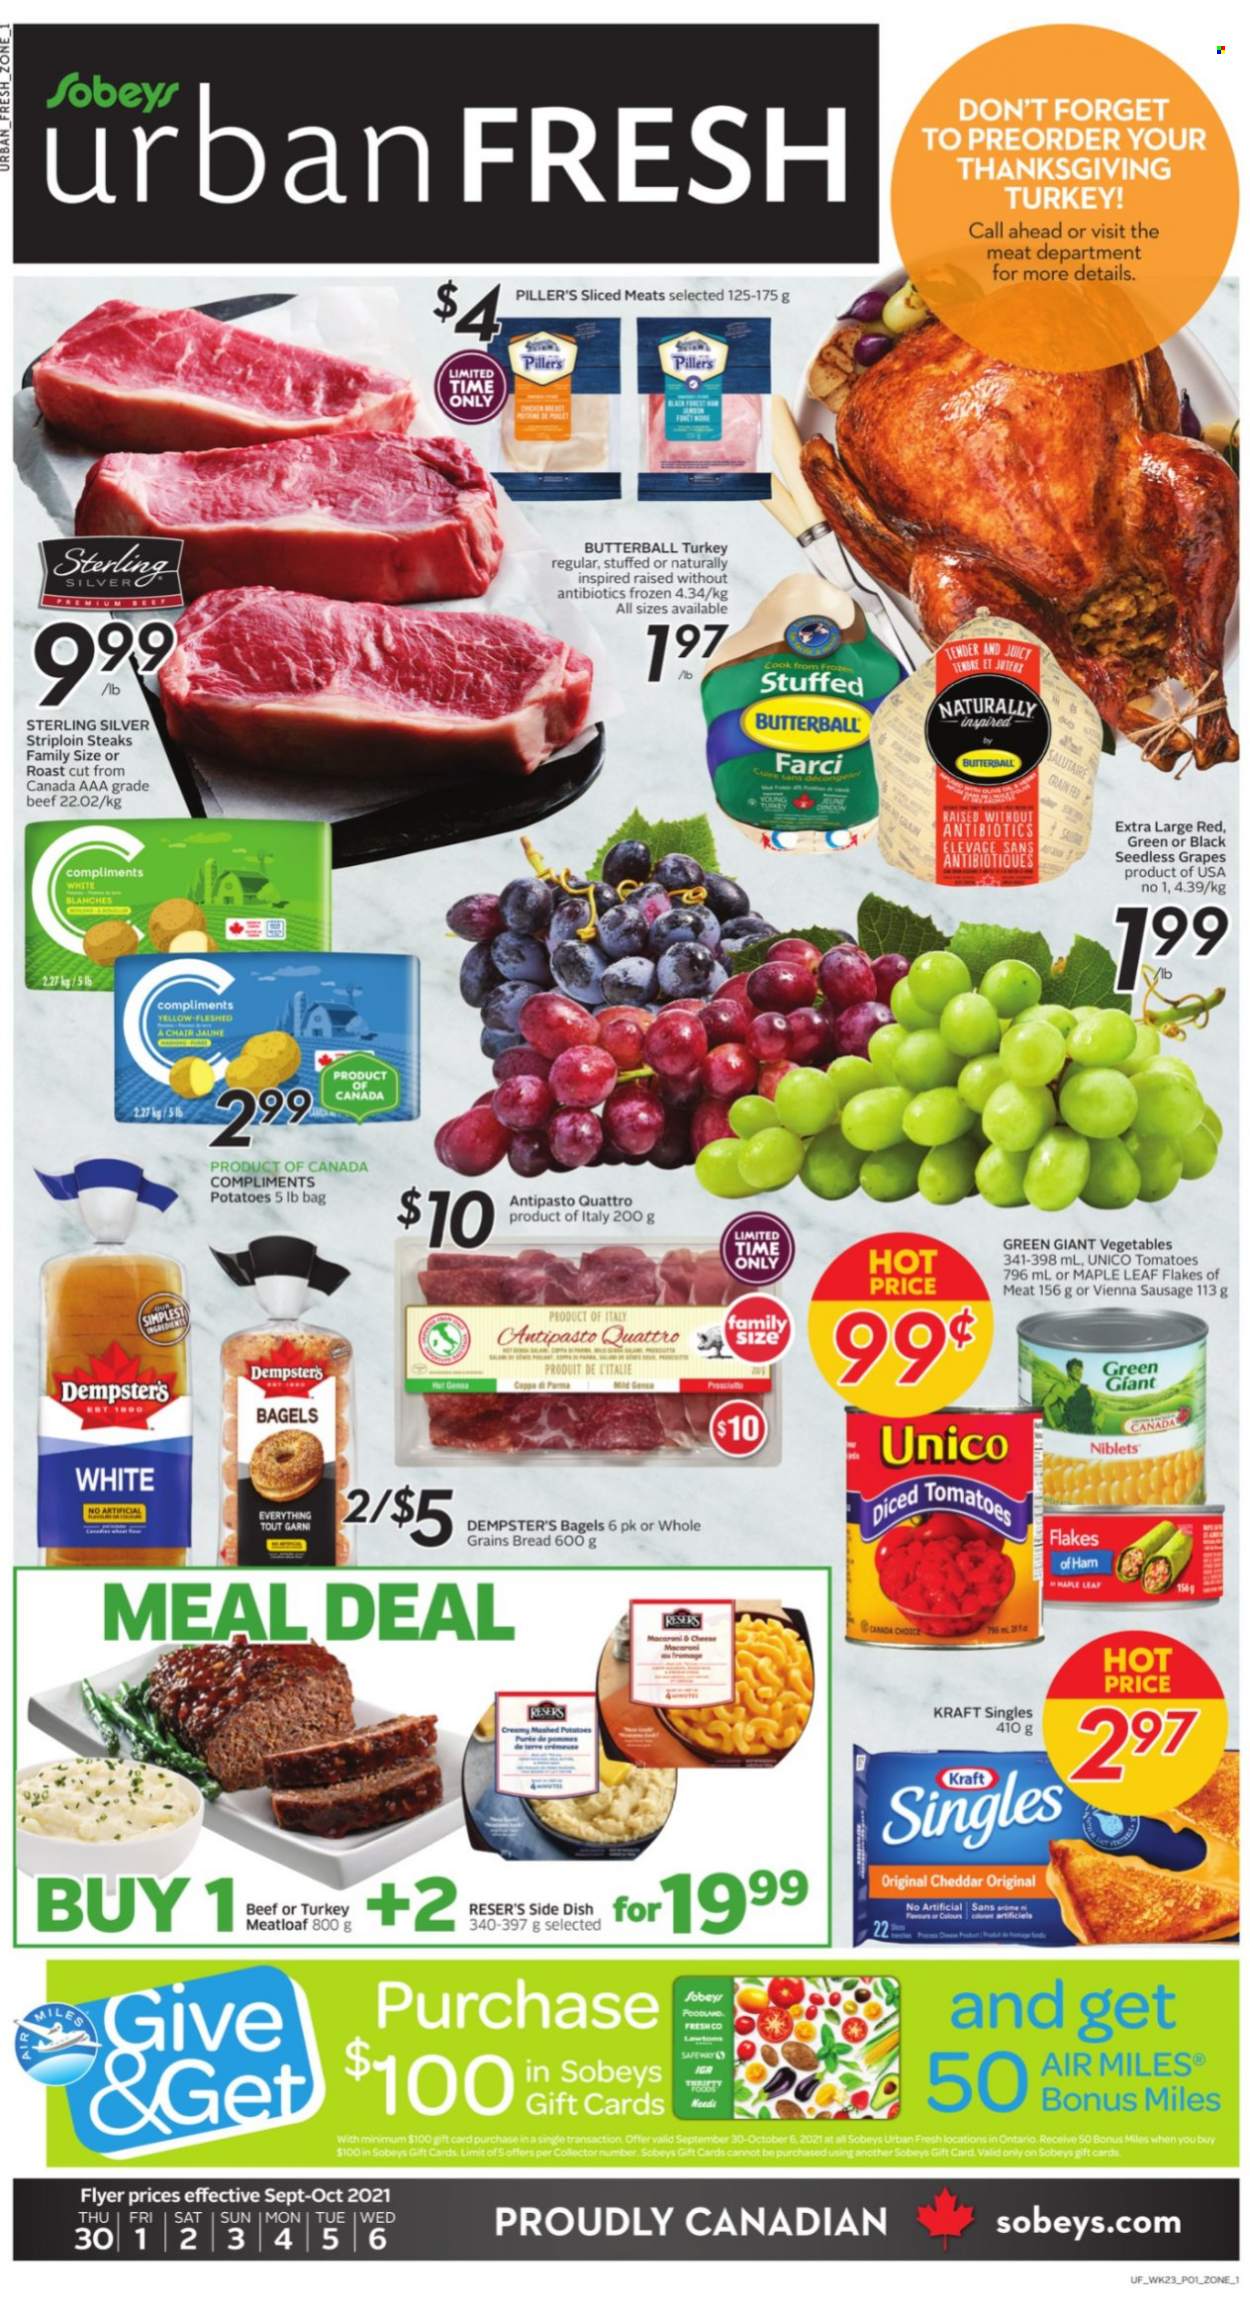 thumbnail - Sobeys Urban Fresh Flyer - September 30, 2021 - October 06, 2021 - Sales products - bagels, bread, tomatoes, potatoes, grapes, seedless grapes, meatloaf, Kraft®, Butterball, ham, sausage, vienna sausage, sandwich slices, cheddar, cheese, Kraft Singles, beef meat, striploin steak, steak. Page 1.